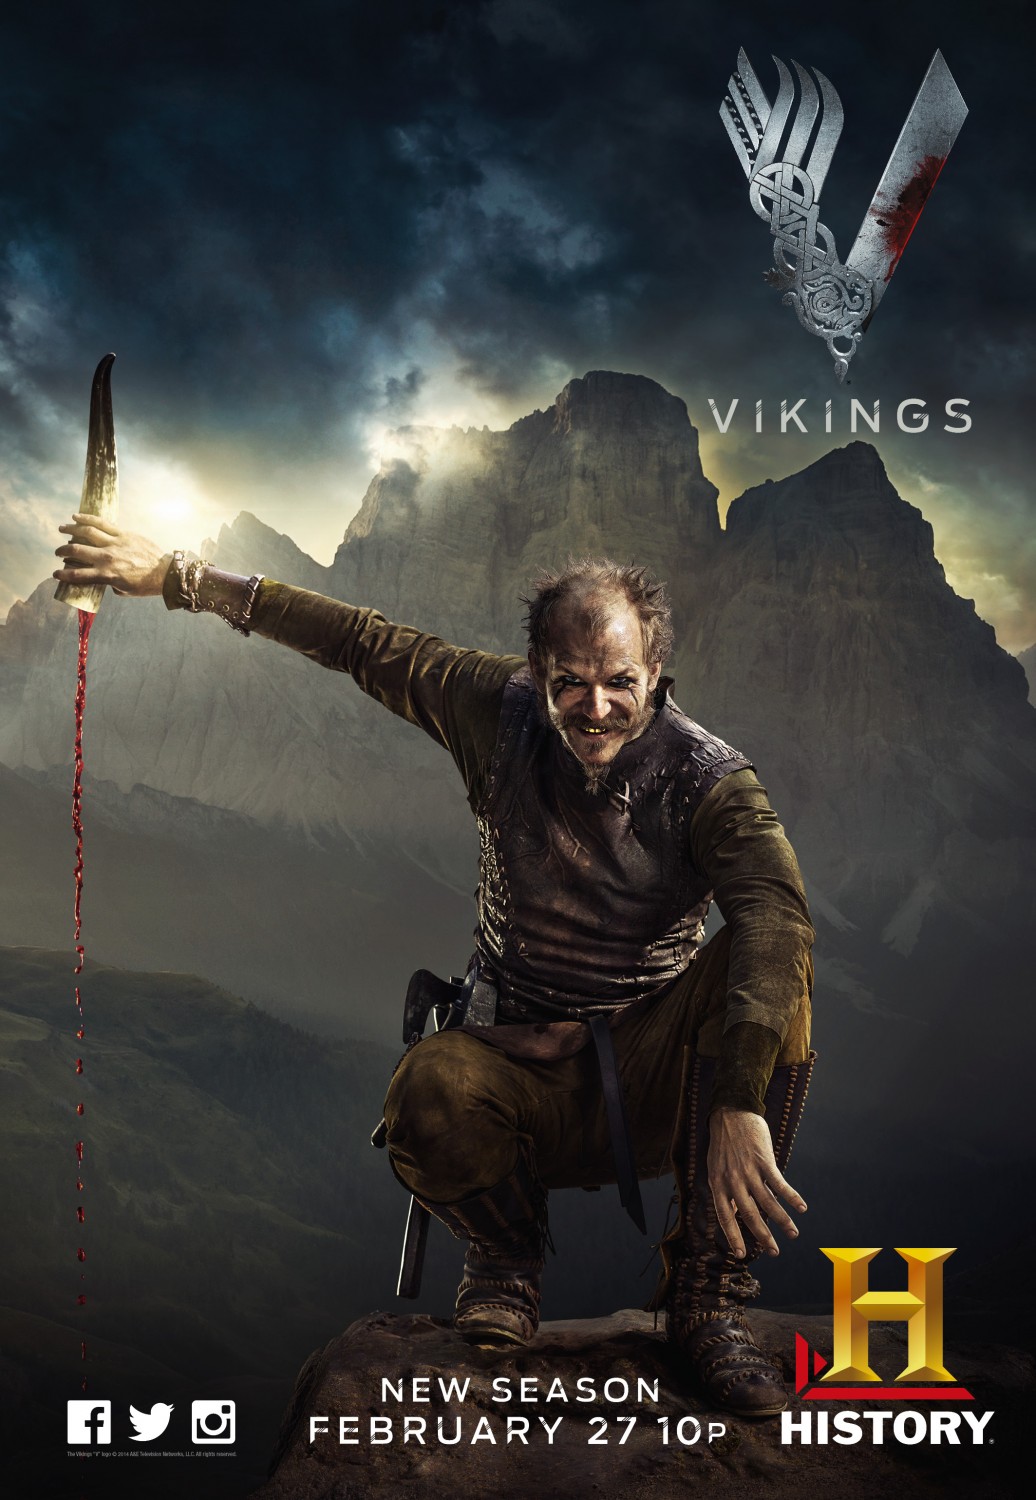 Extra Large TV Poster Image for Vikings (#5 of 30)